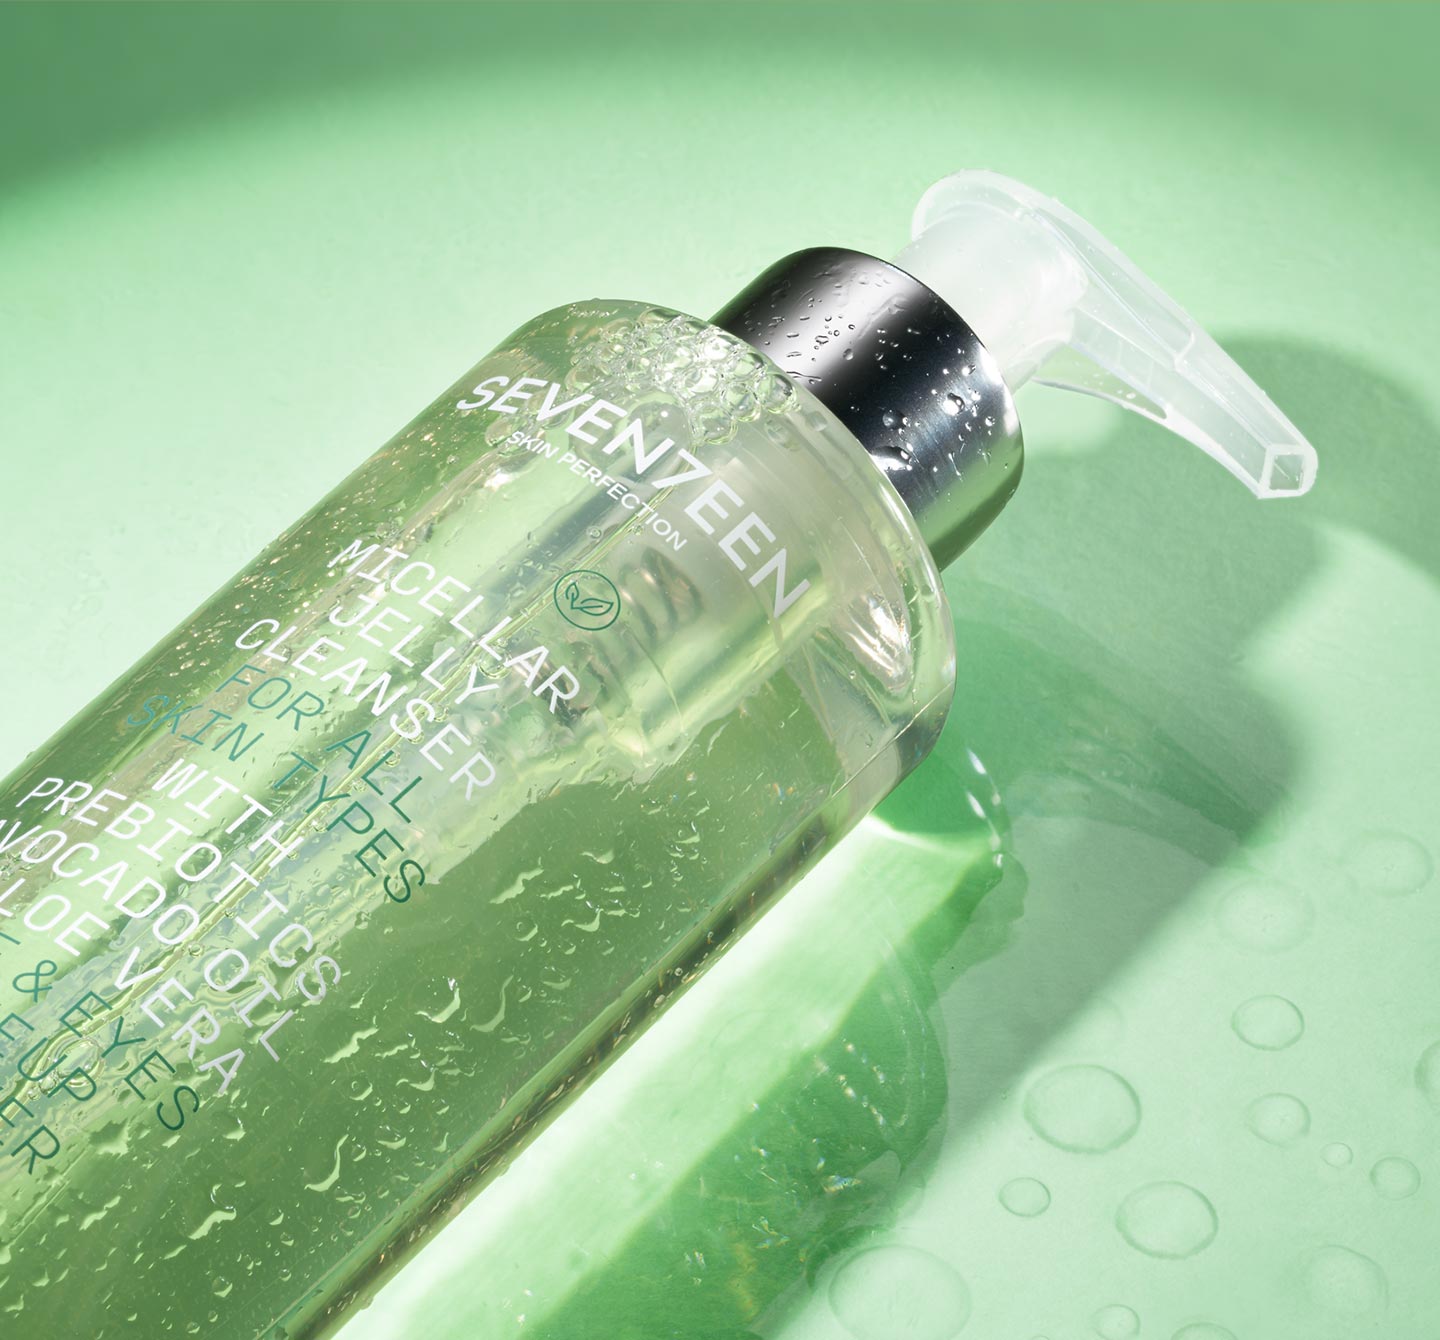 MICELLAR JELLY CLEANSER